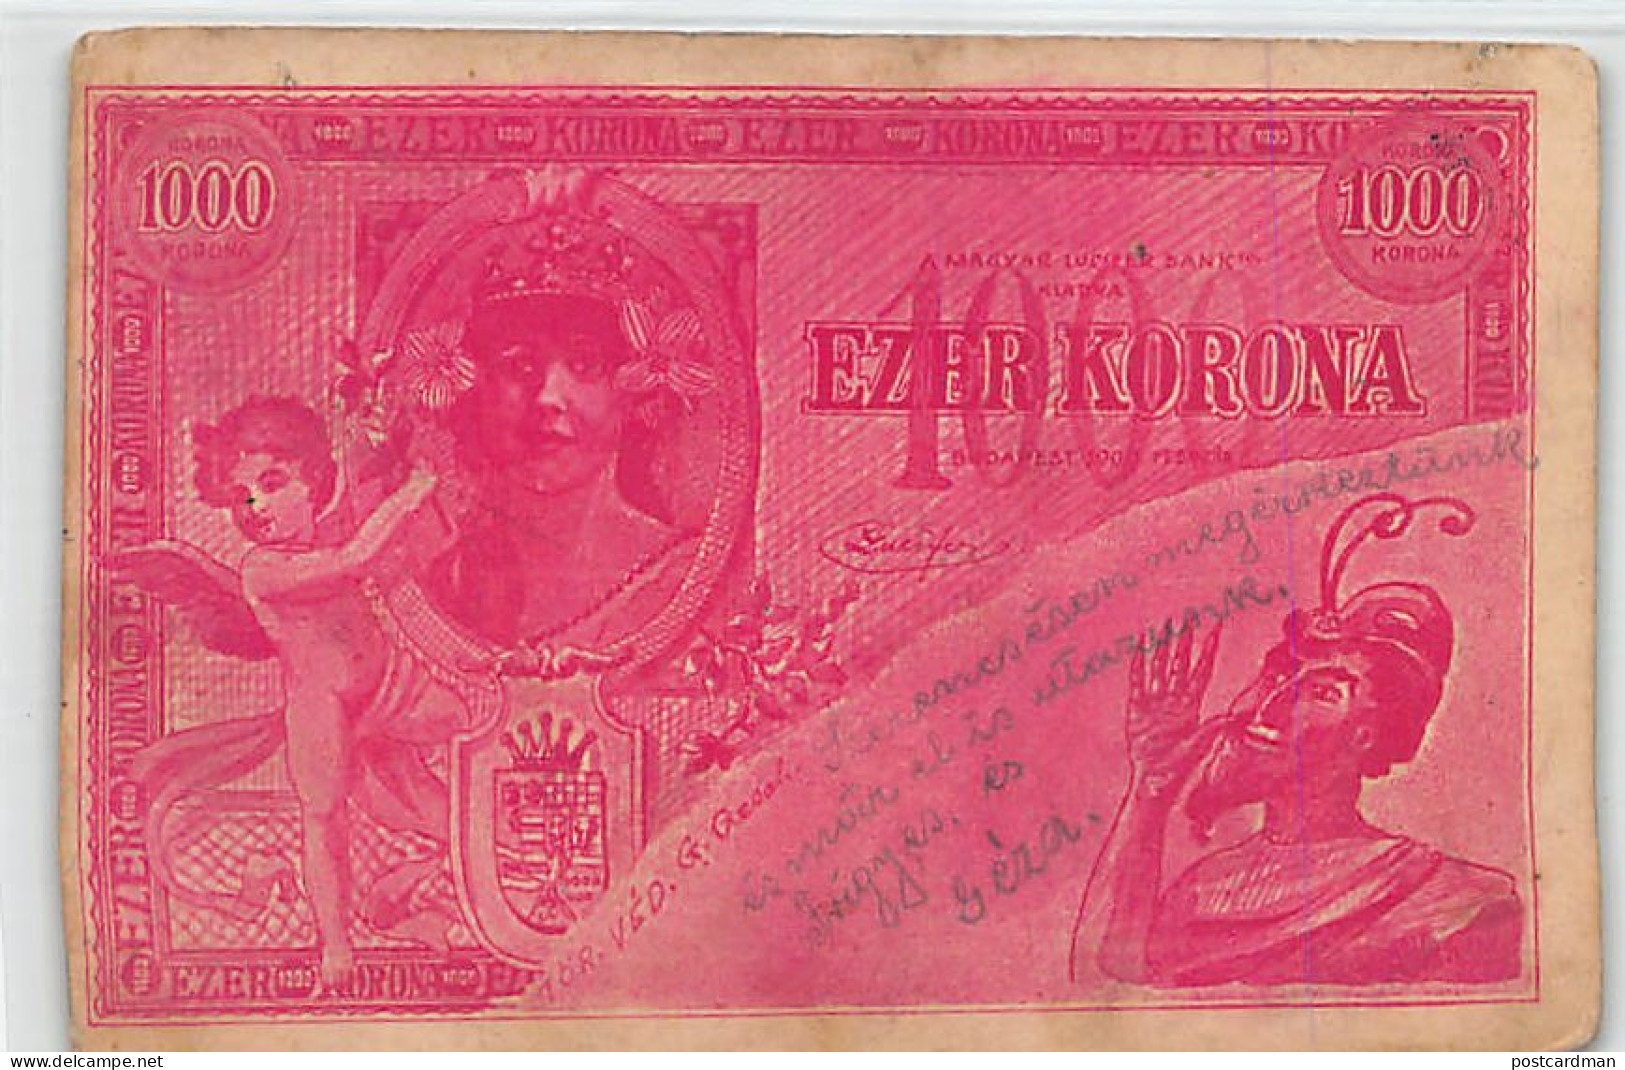 Hungary - 1000 Korona Banknote - SEE SCANS FOR CONDITION - Hungary